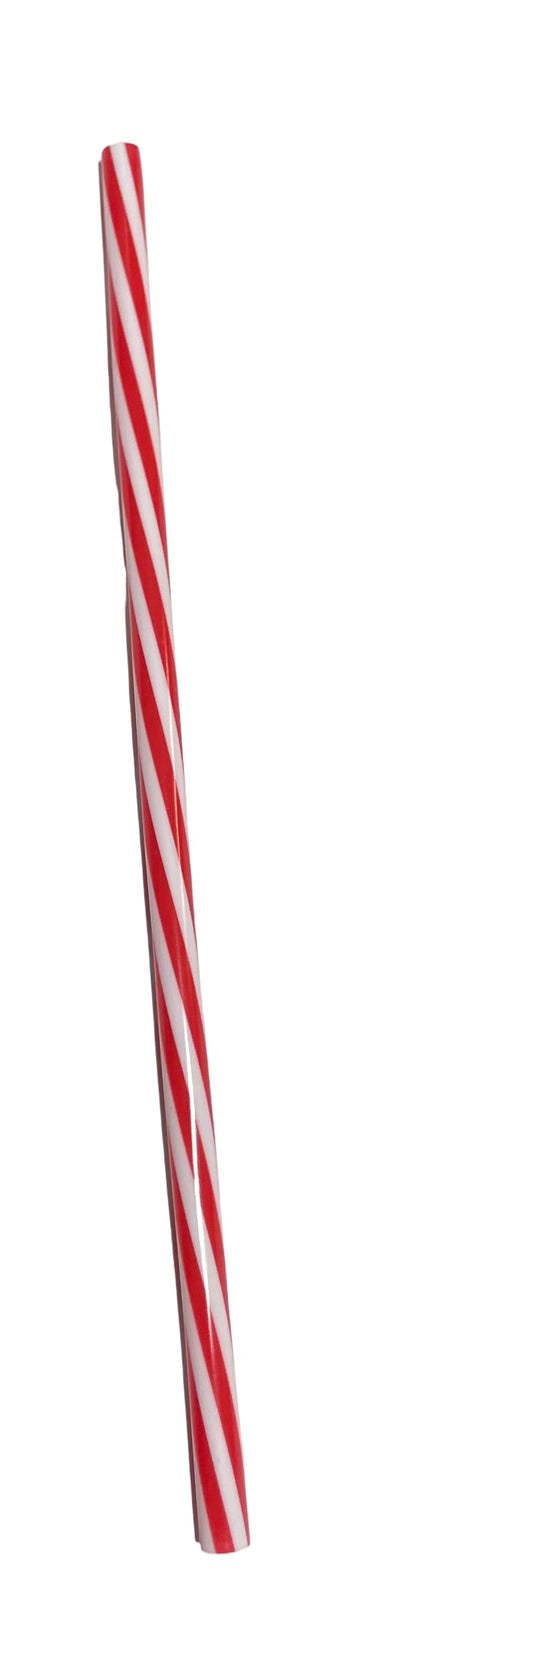 Candy Cane Swirl  Reusable Plastic Straw